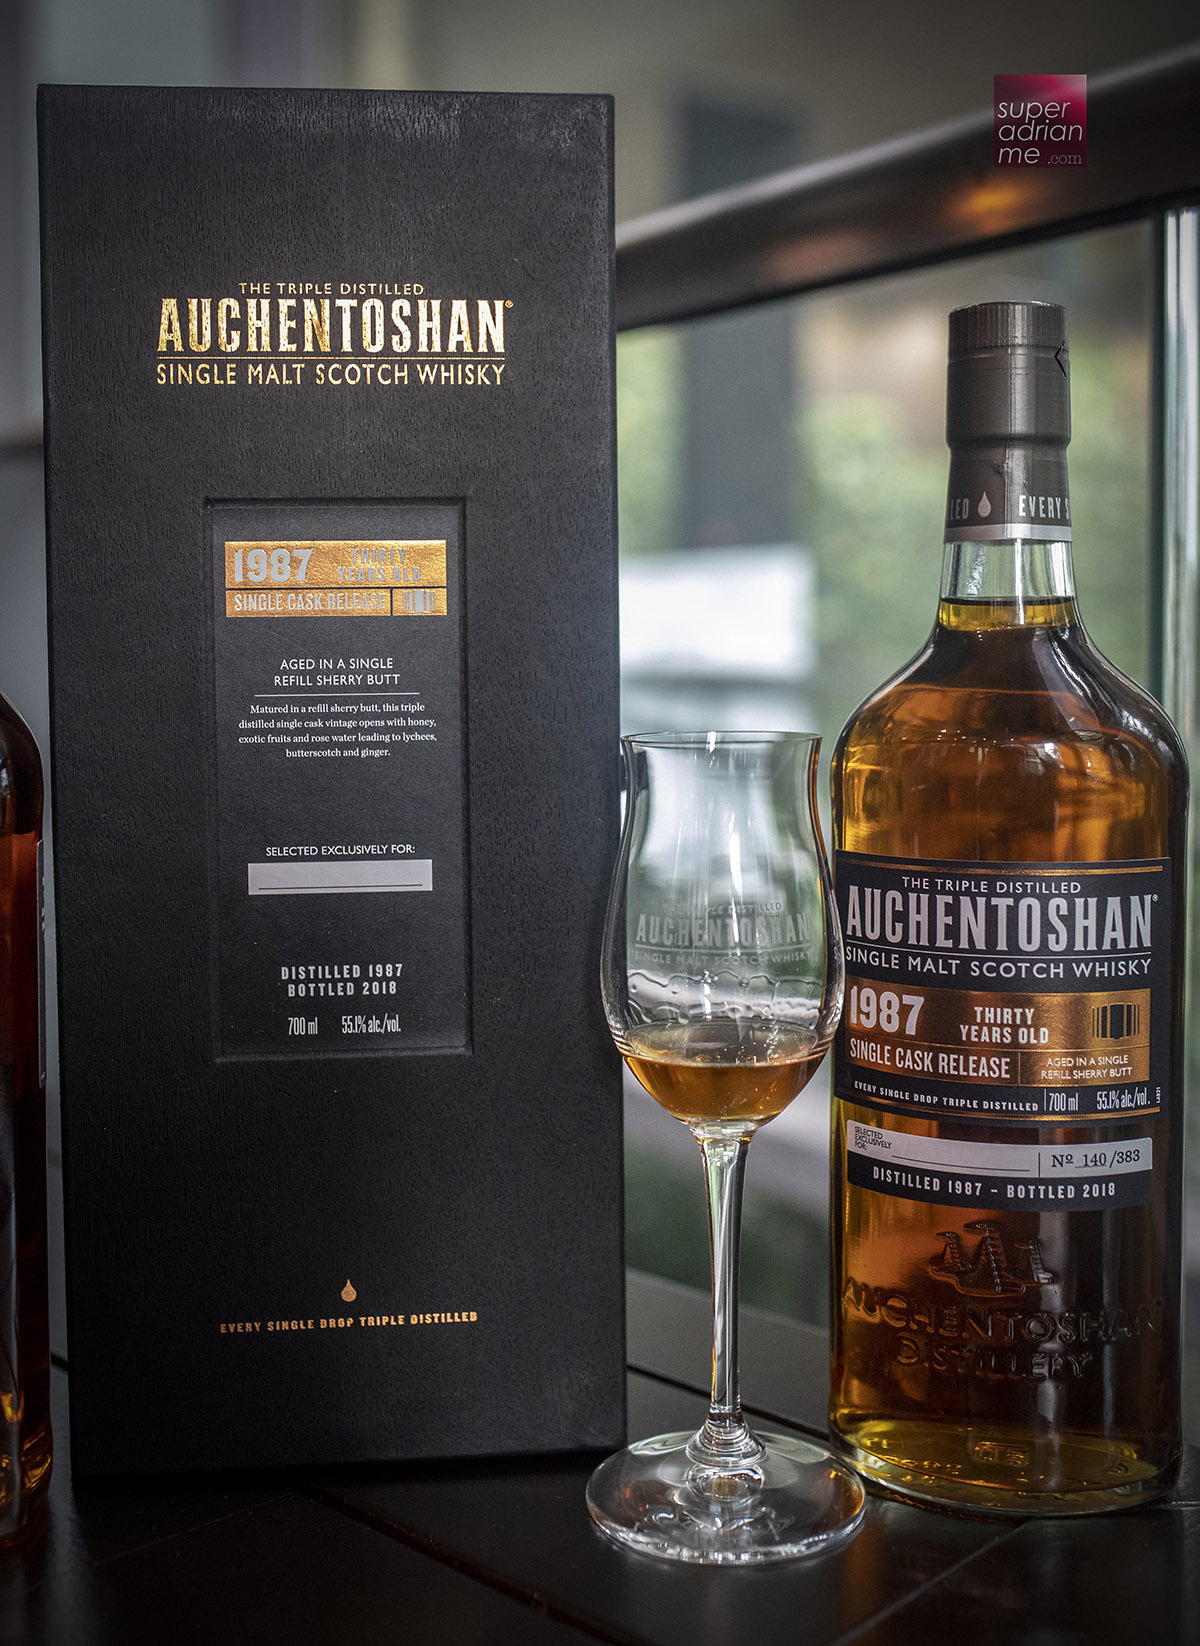 Auchentoshan 30 year old bottled exclusively for Singapore